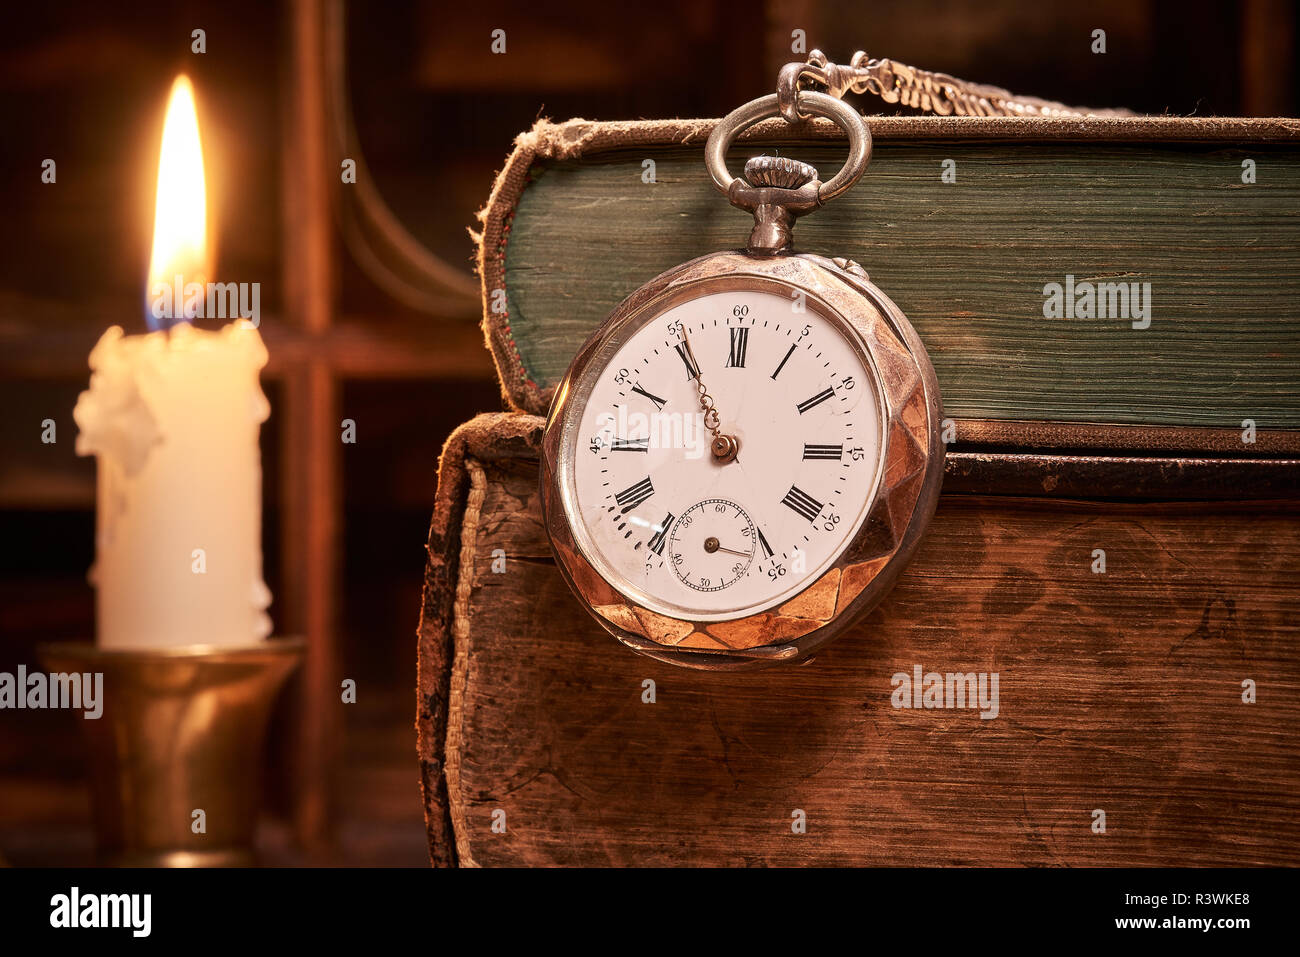 Old books with antique pocket watch by candlelight Stock Photo